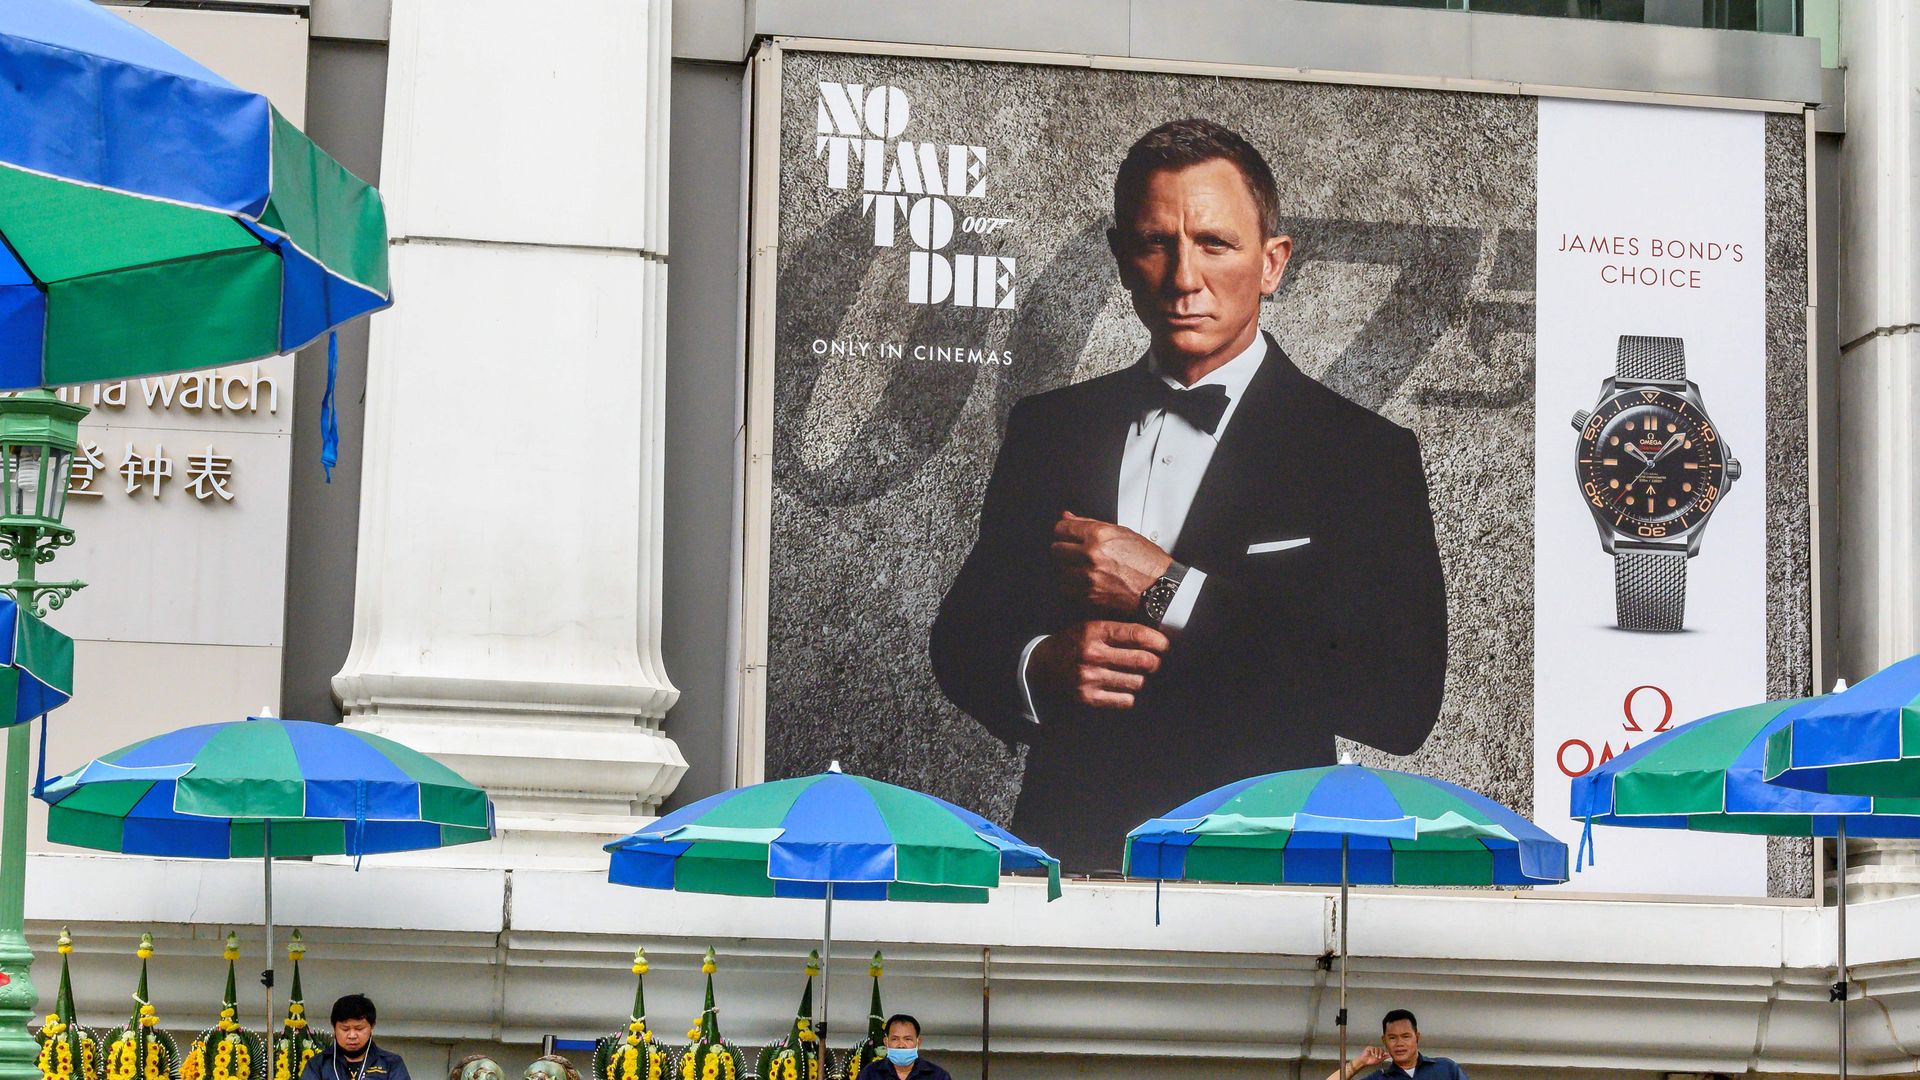 an advertisement poster featuring Daniel Craig in the new James Bond movie "No Time to Die" in Bangkok 